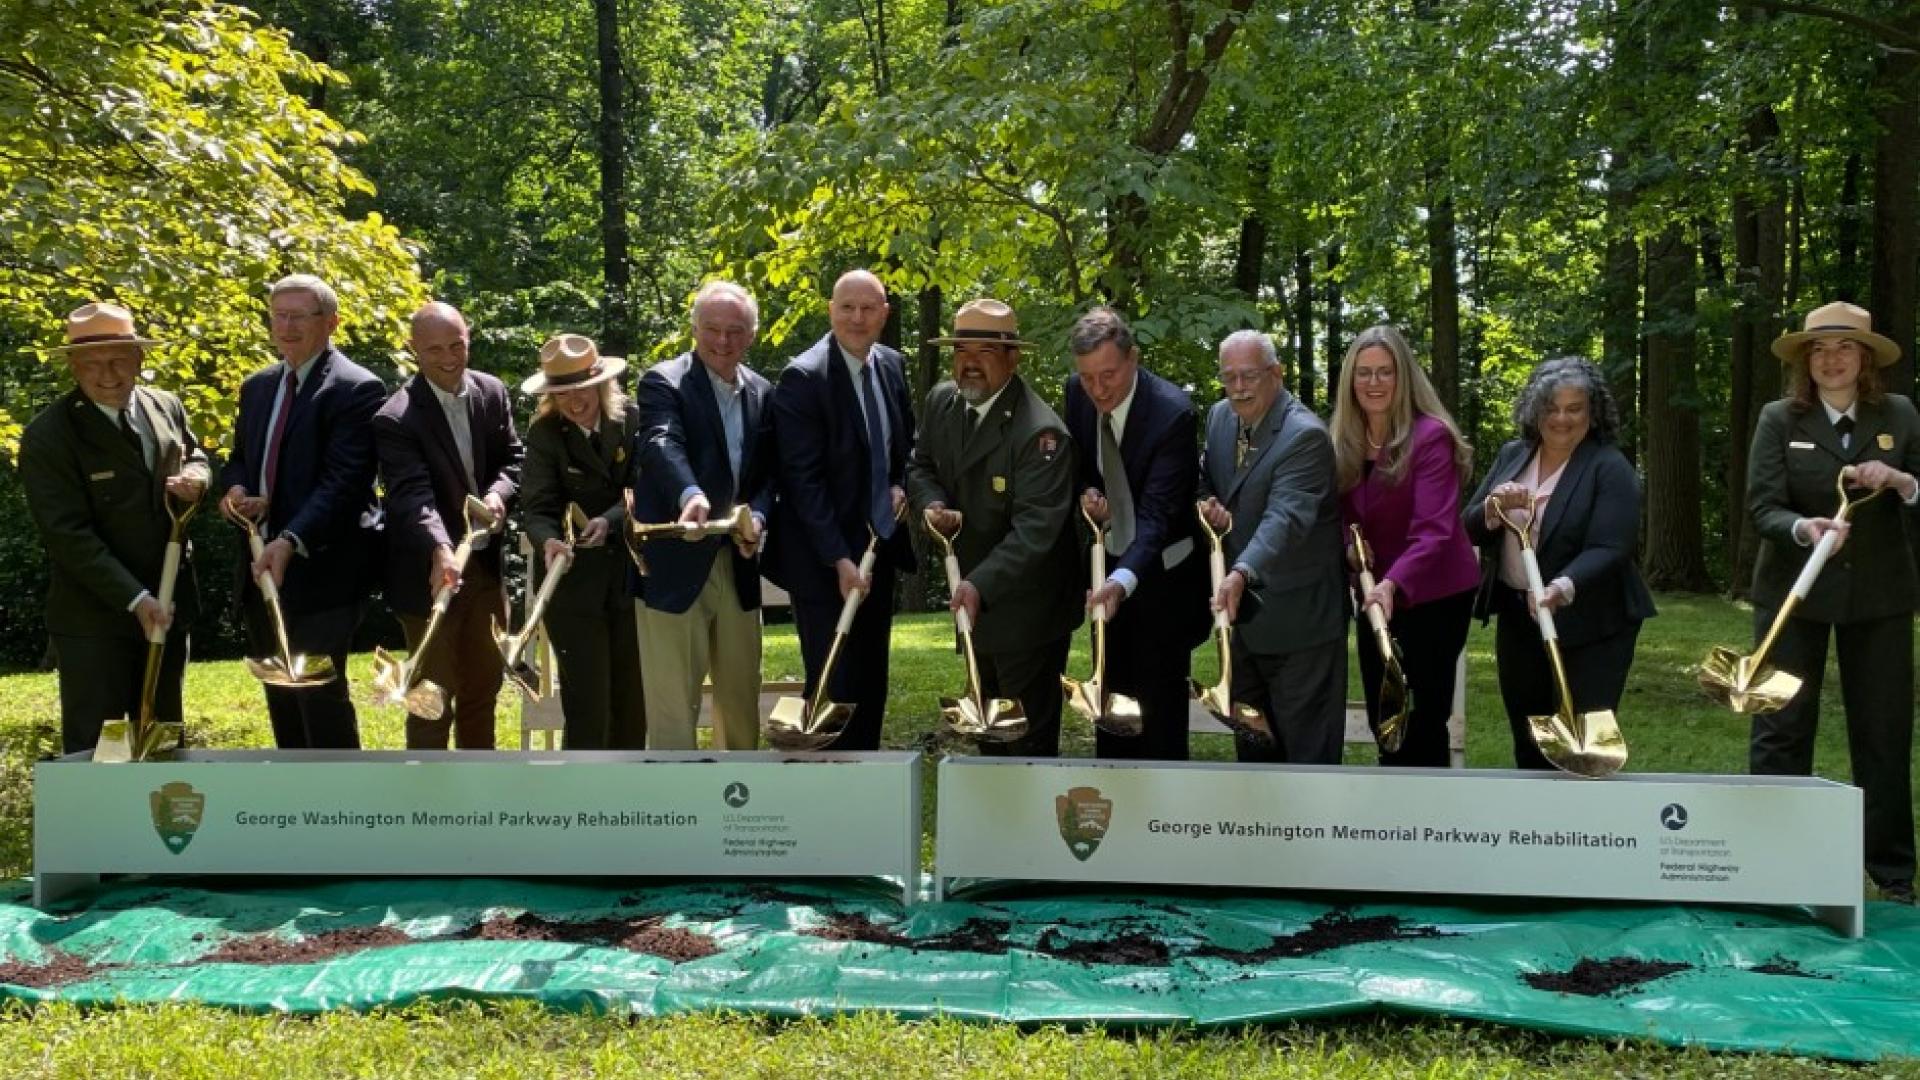 Various people, wearing suits and green uniforms, dig dirt behind a banner reading "George Washington Memorial Parkway Rehabilitation".